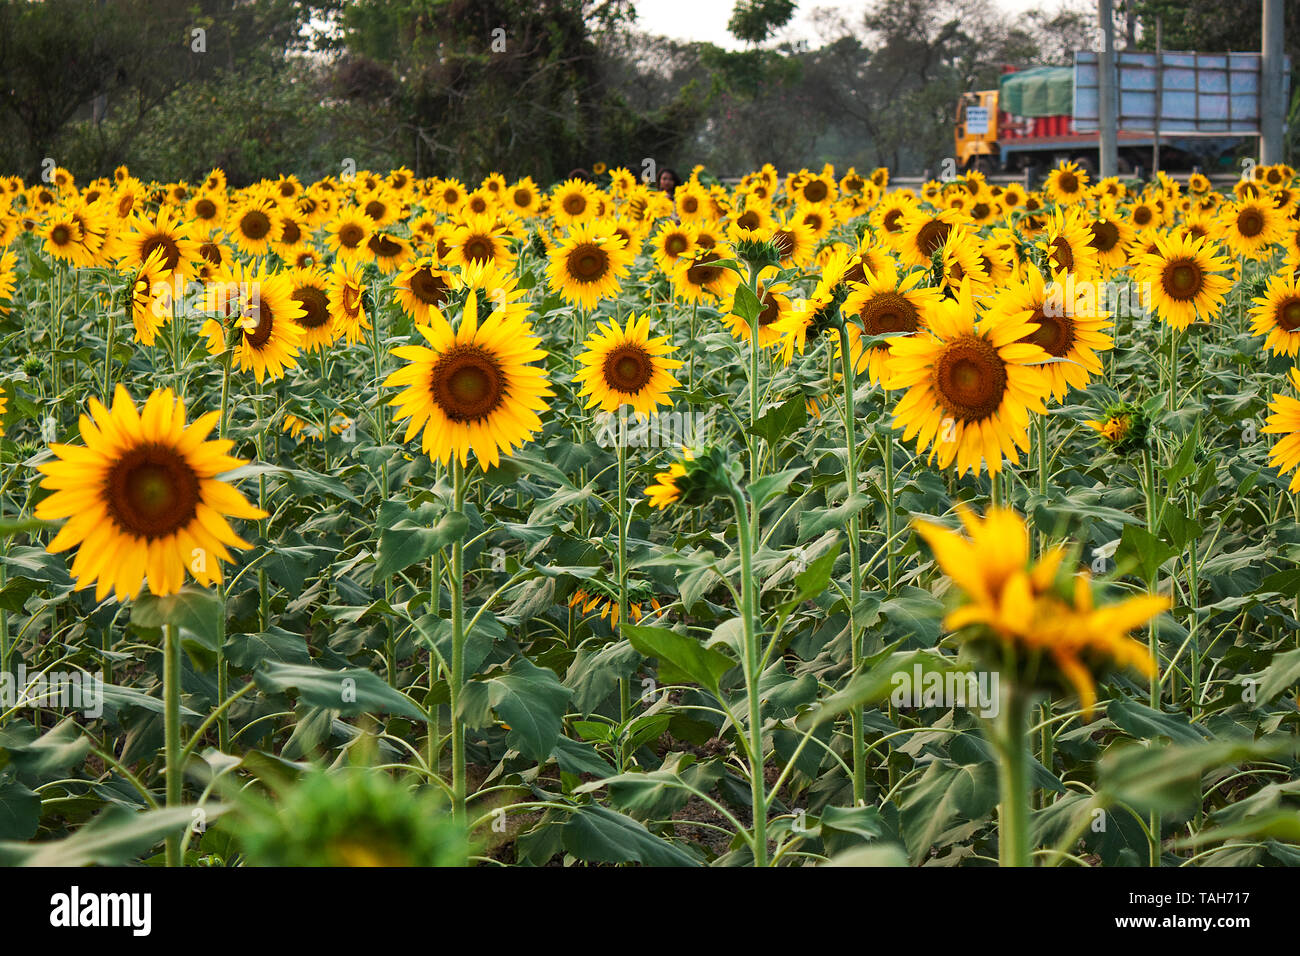 Download Bangladesh Sunflower High Resolution Stock Photography And Images Alamy